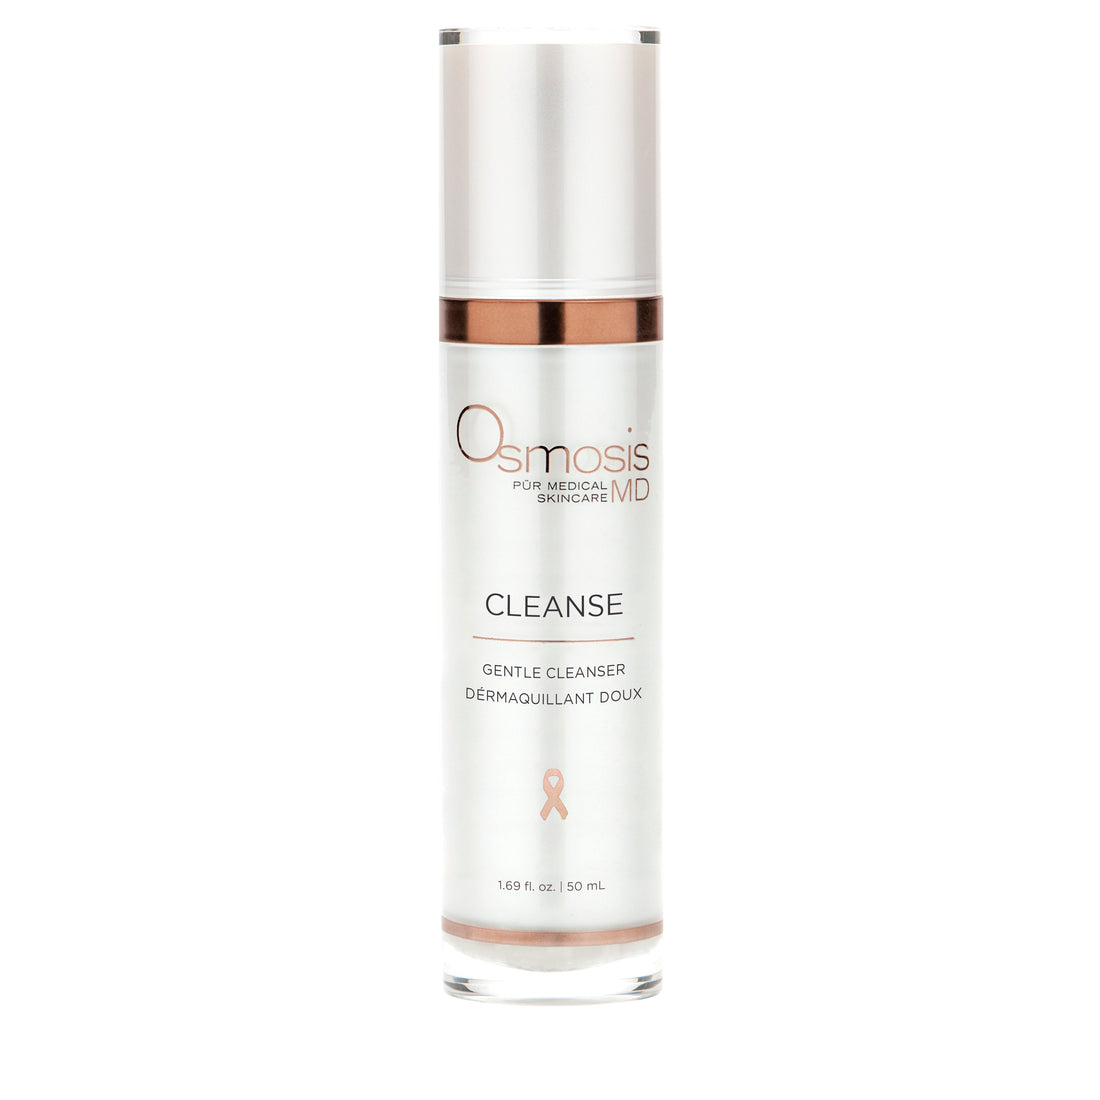 Osmosis Cleanse - Gentle Cleanser